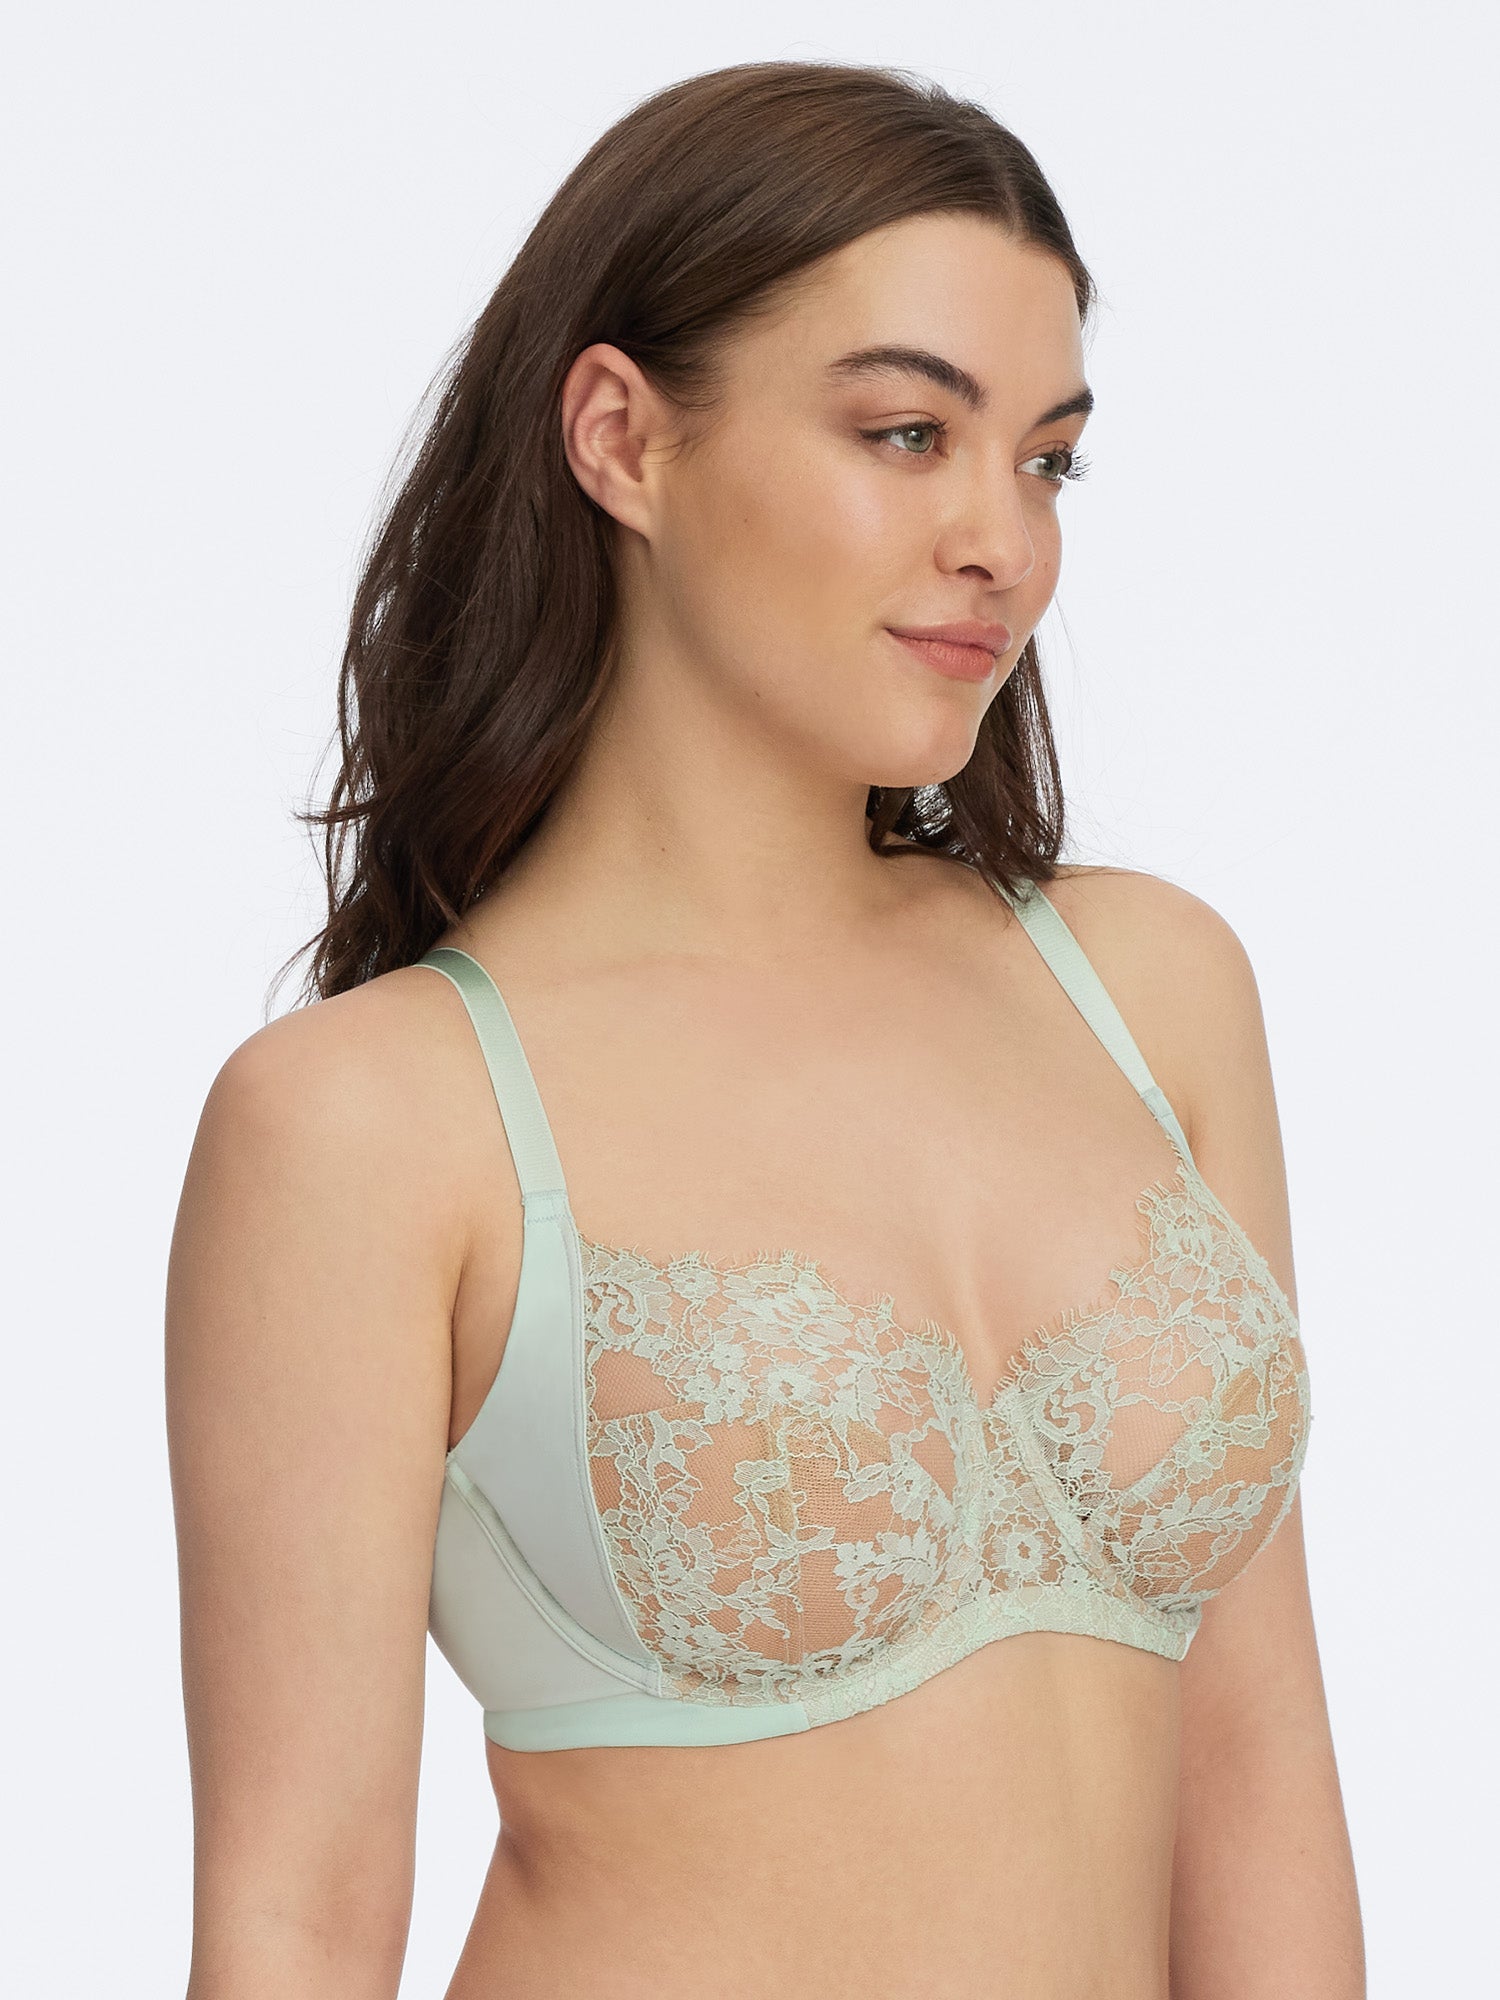 Bra Review: Evollove Fly High & Estate Blue Splash Print and Lace Balconette,  32G/32FF – Let's talk about bras